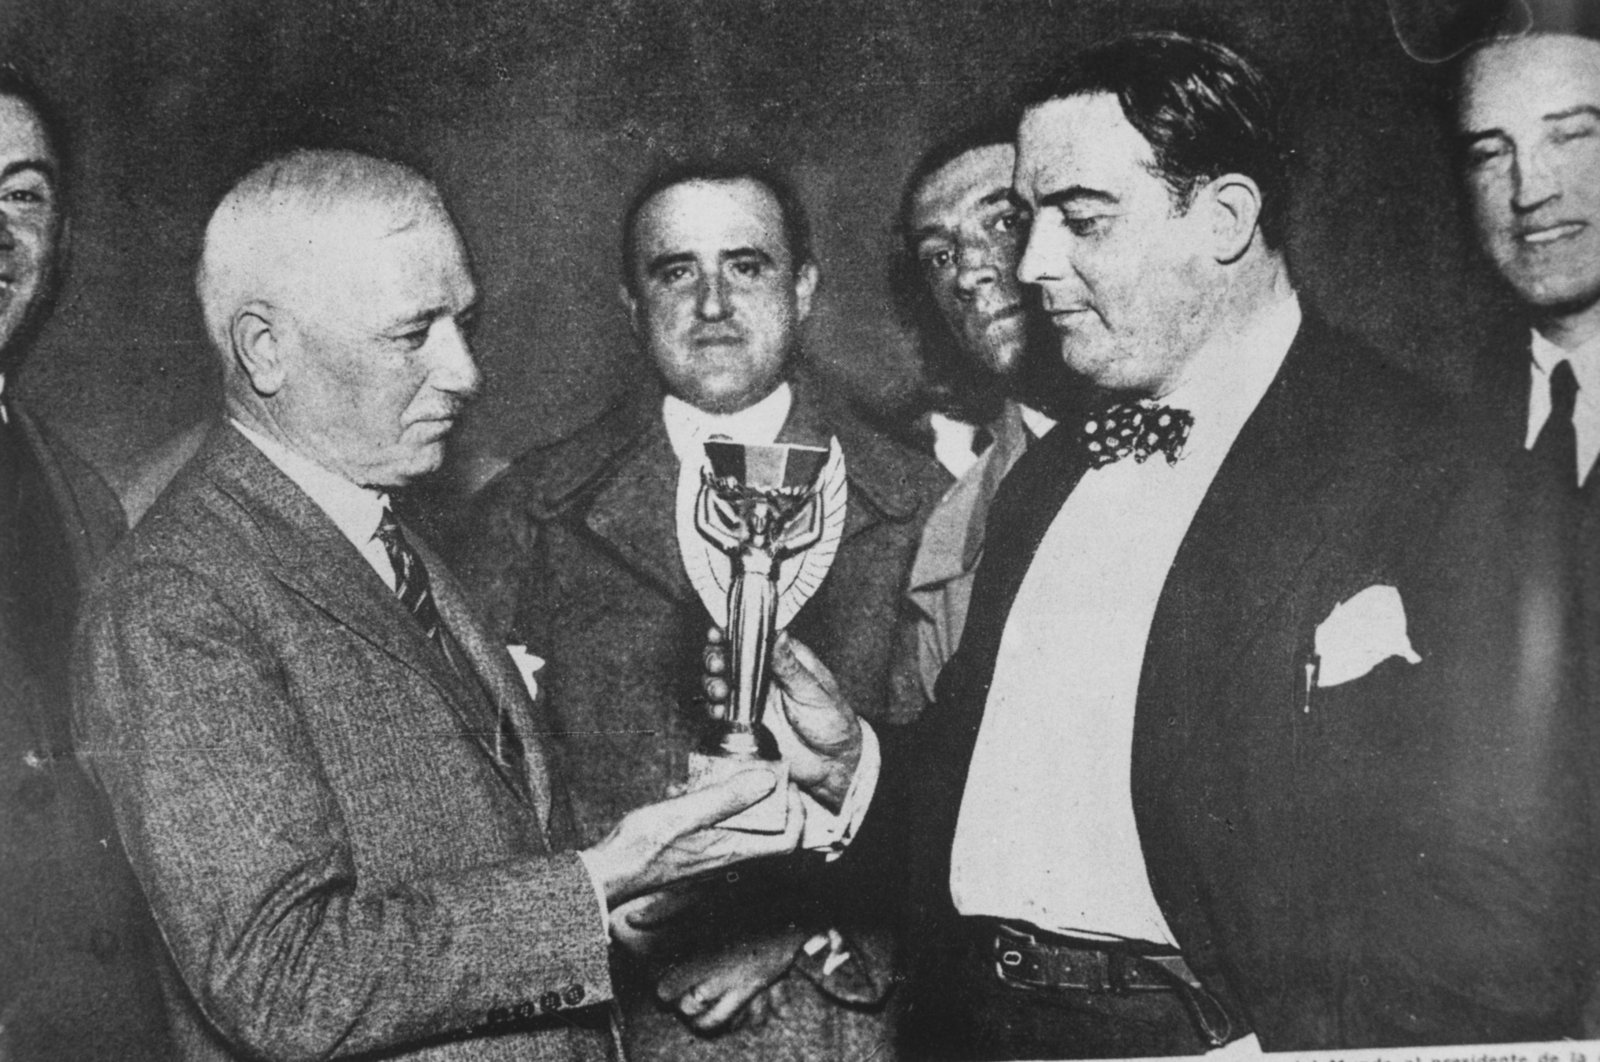 Jules Rimet, president of FIFA, presents the first World Cup trophy (the Jules Rimet Trophy) to Dr Paul Jude, the president of the Uruguayan Football Association, after Uruguay beat Argentina 4-2 in the first ever World Cup final, Montevideo, Uruguay, July 30, 1930. (Getty Images Photo)